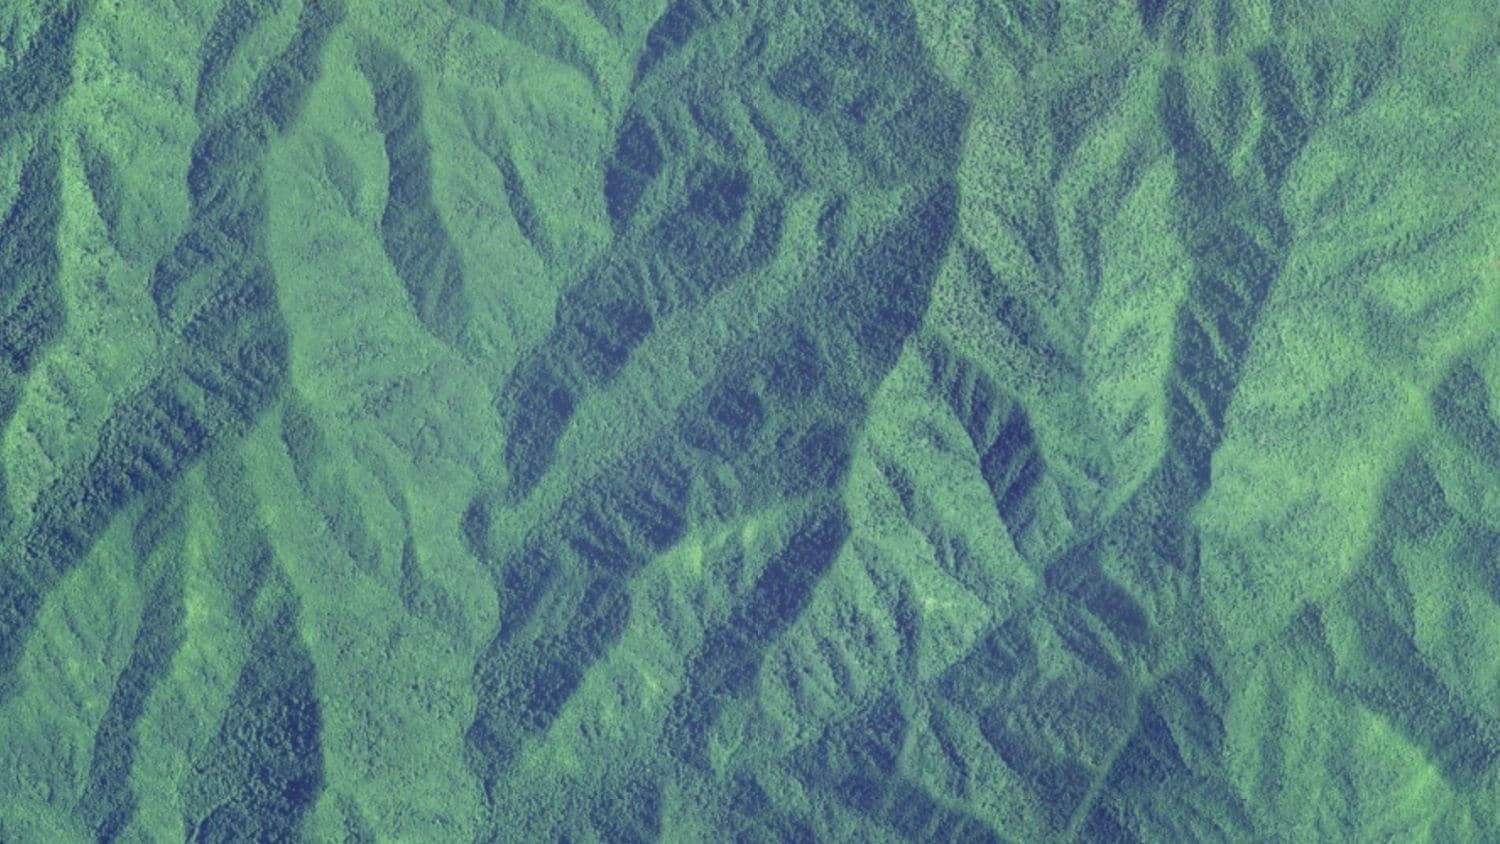 Aerial of forests in Great Smoky Mountains. - During Droughts, Thirstier Mountain Forests Could Mean Less Water Downstream - Forestry and Environmental Resources NC State University